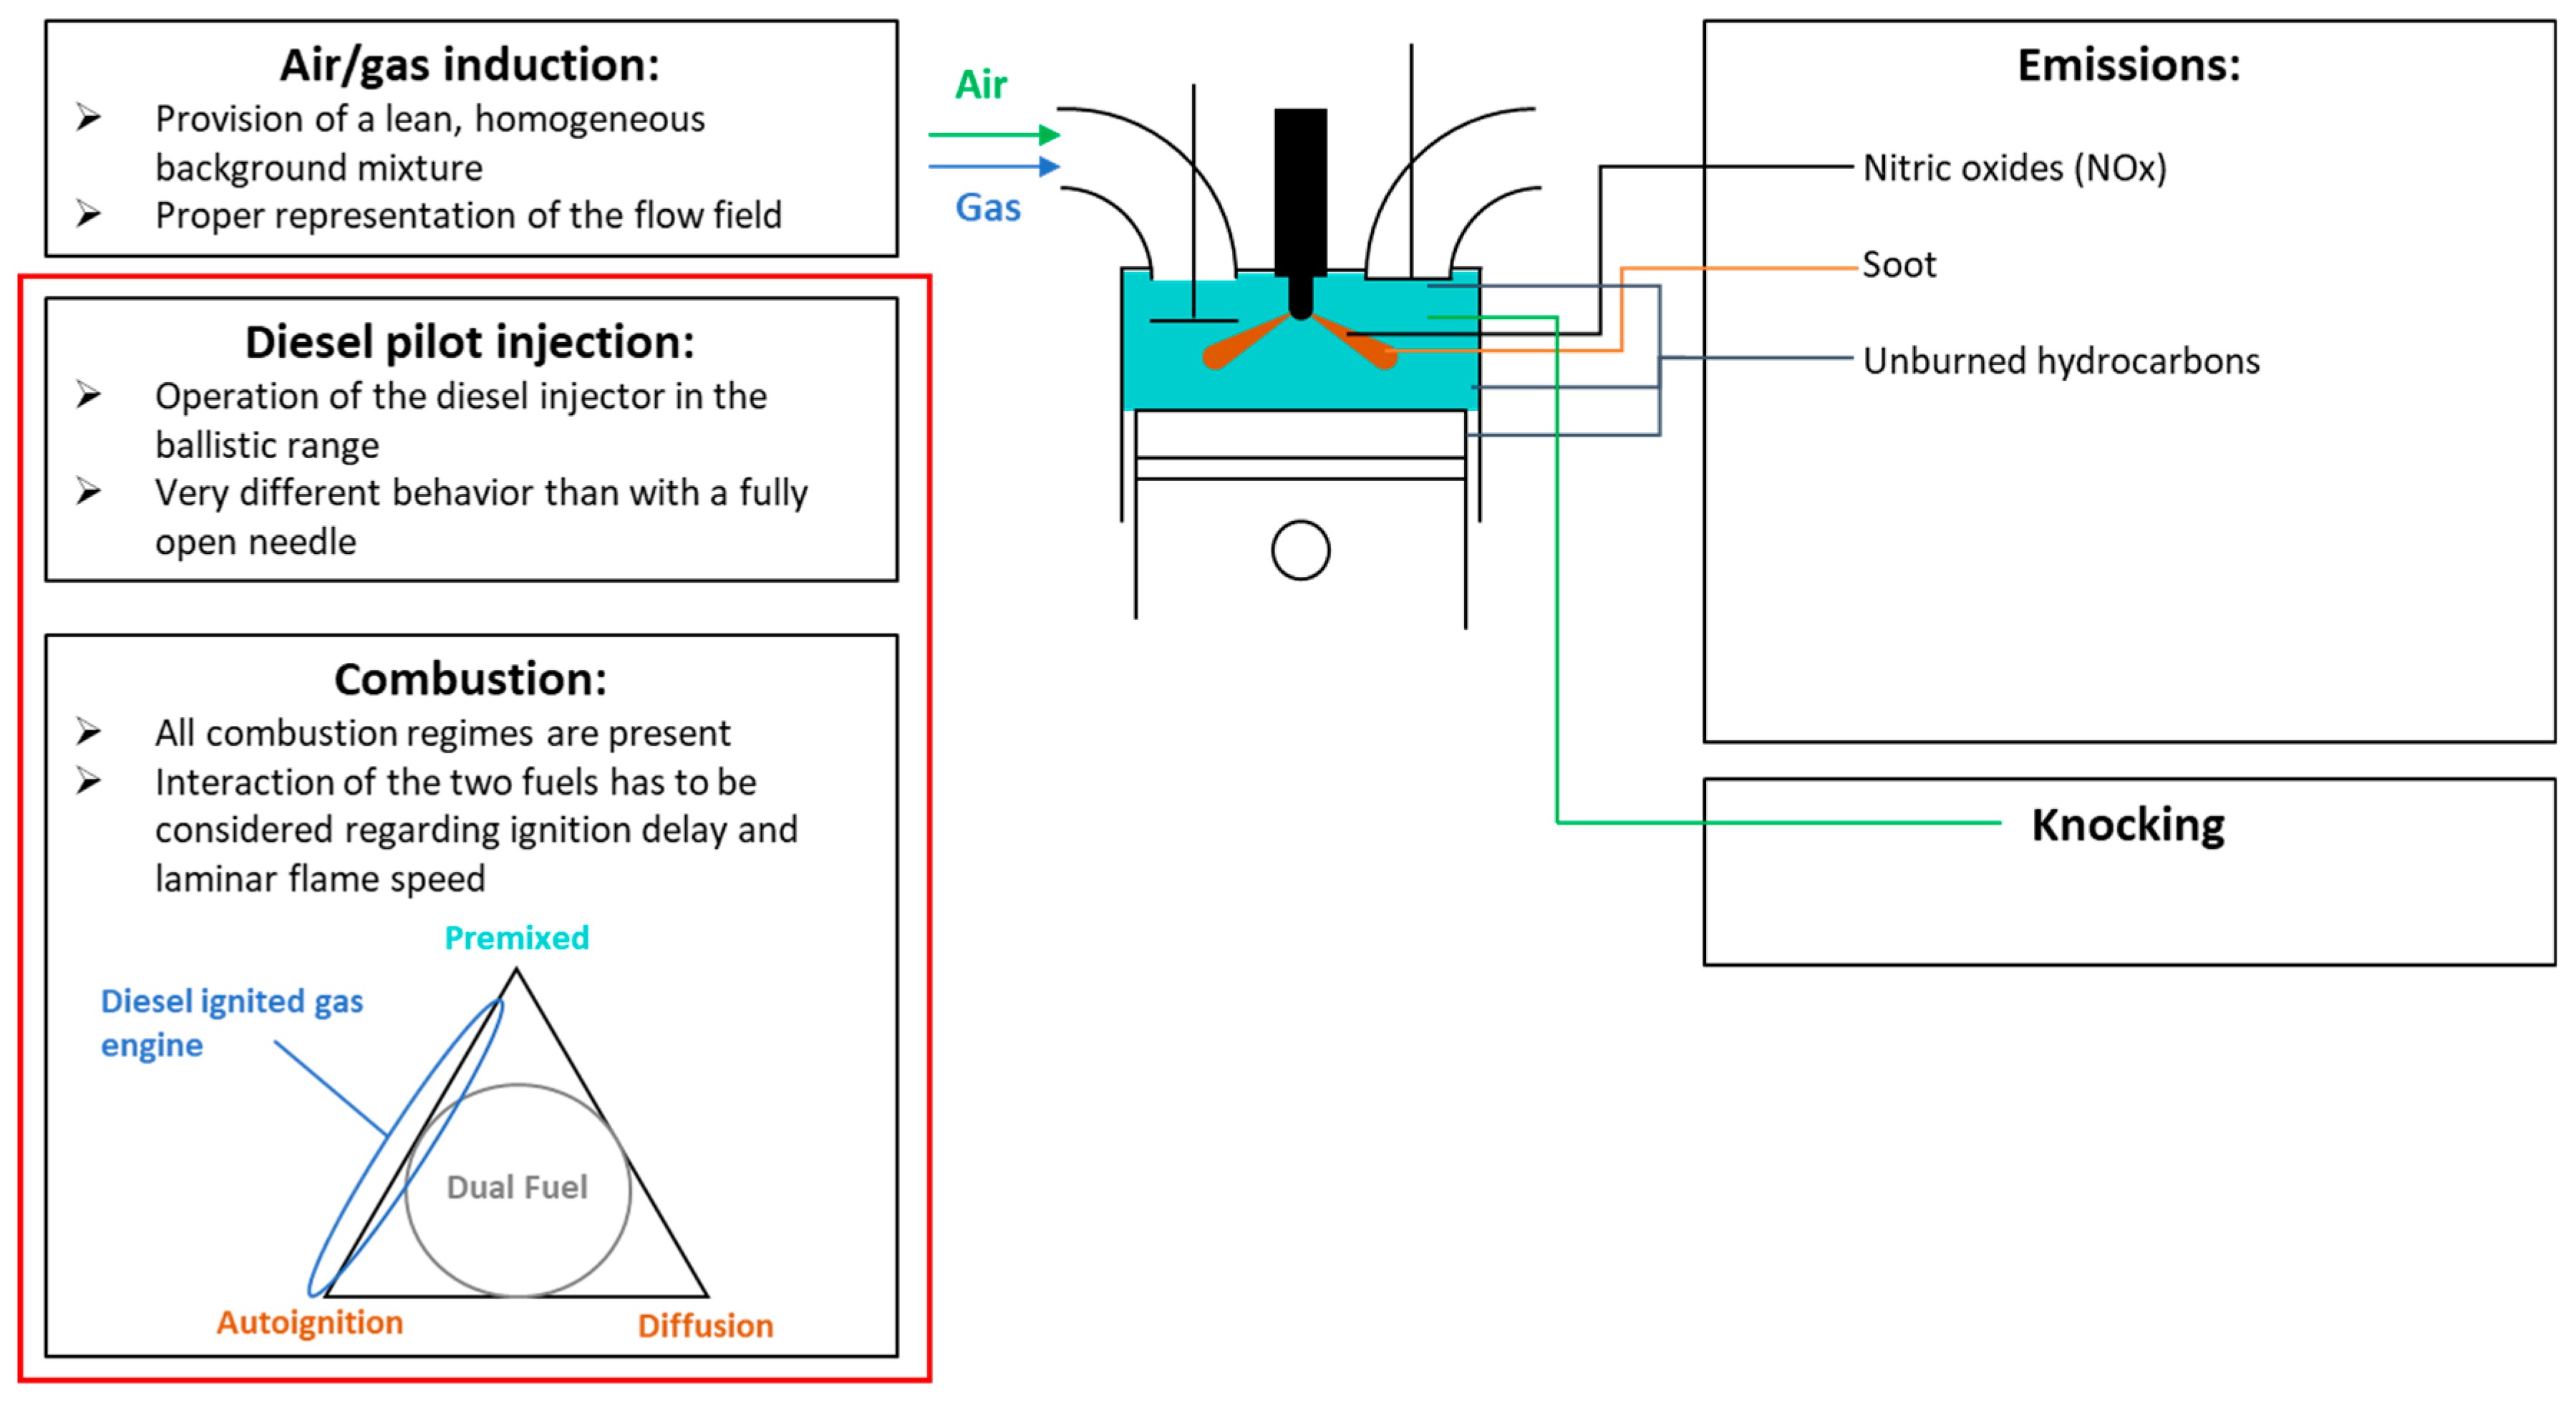 Two Cycle Engine Diagram Energies Free Full Text Of Two Cycle Engine Diagram